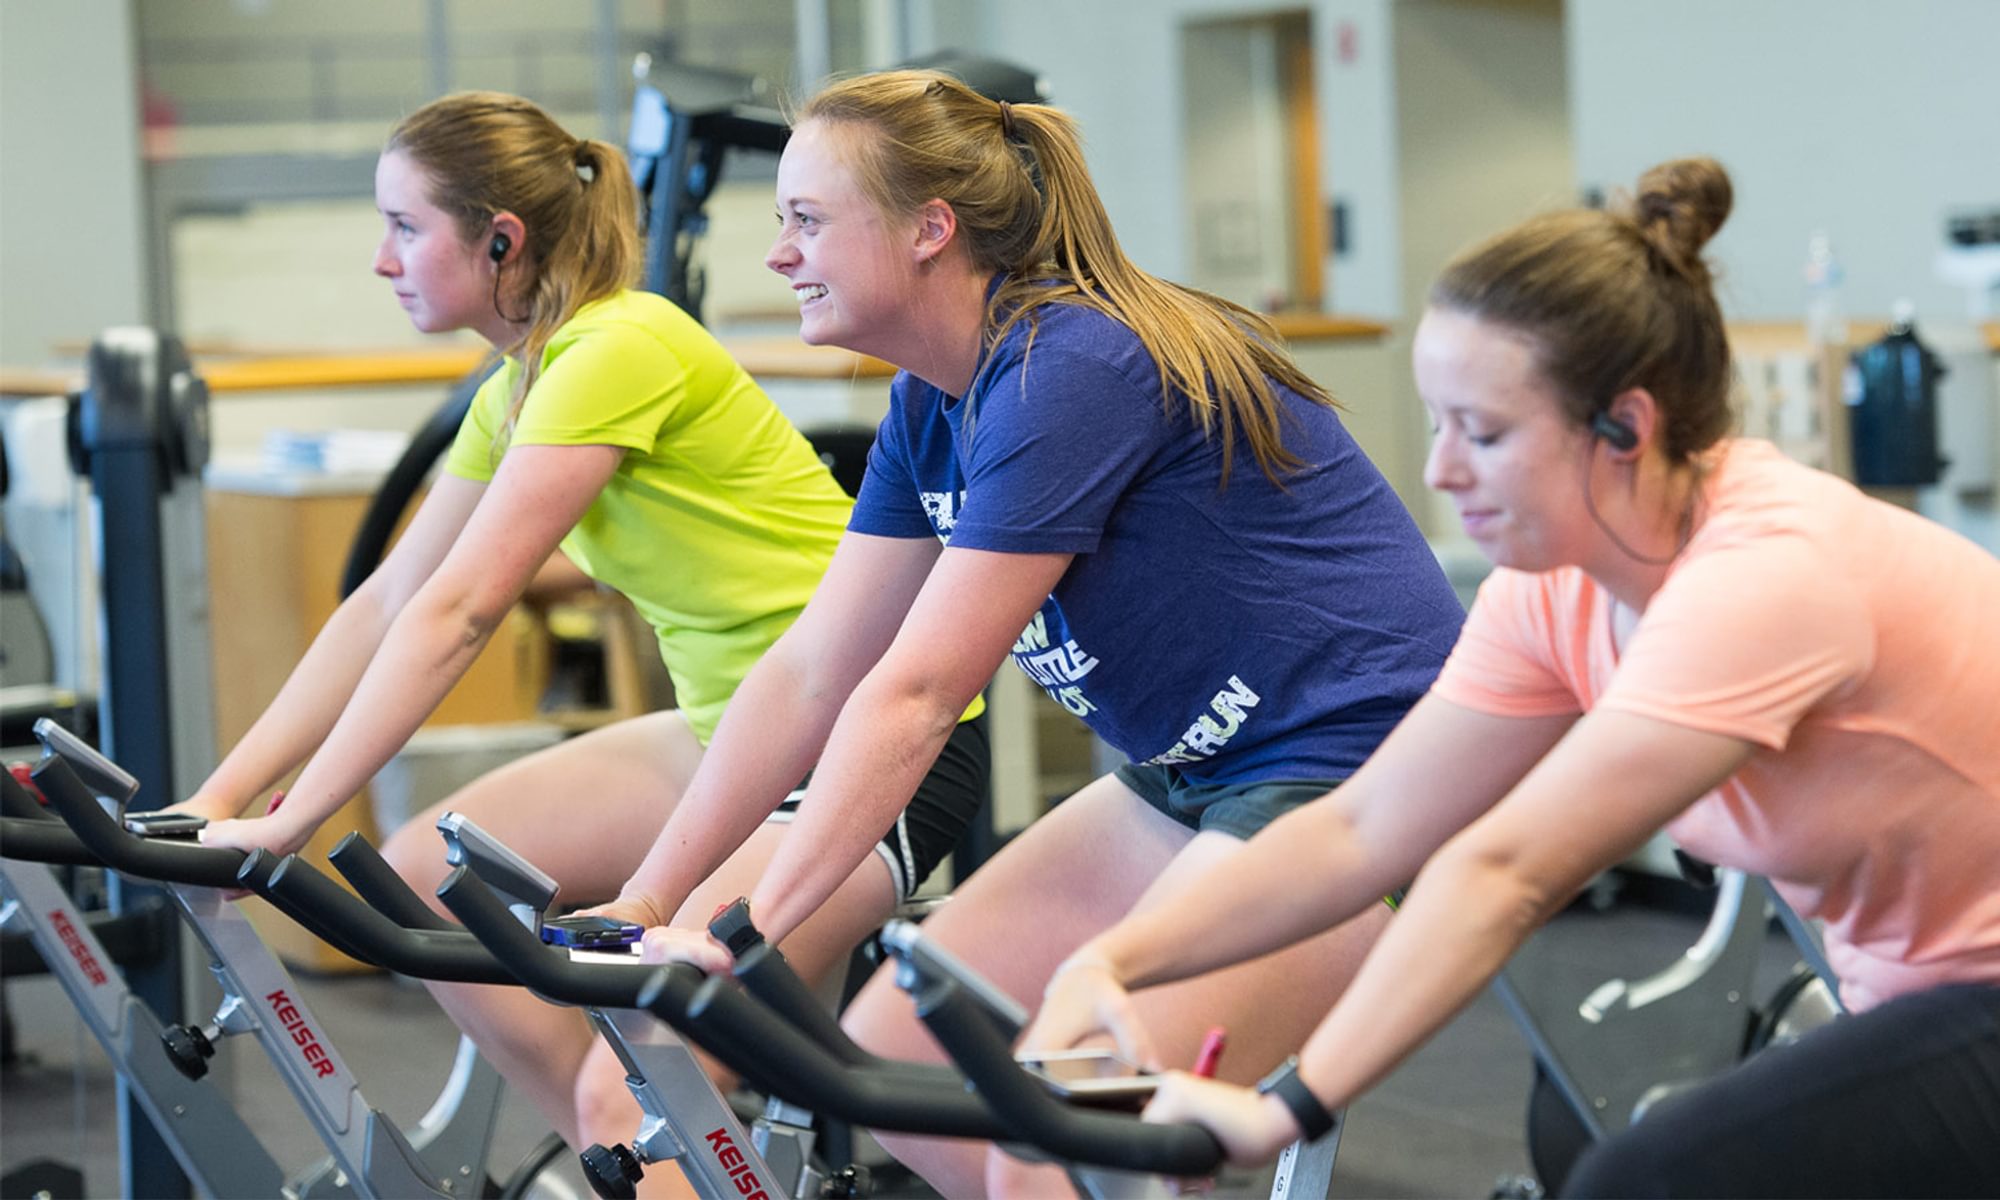 UMHB students on spin bikes.